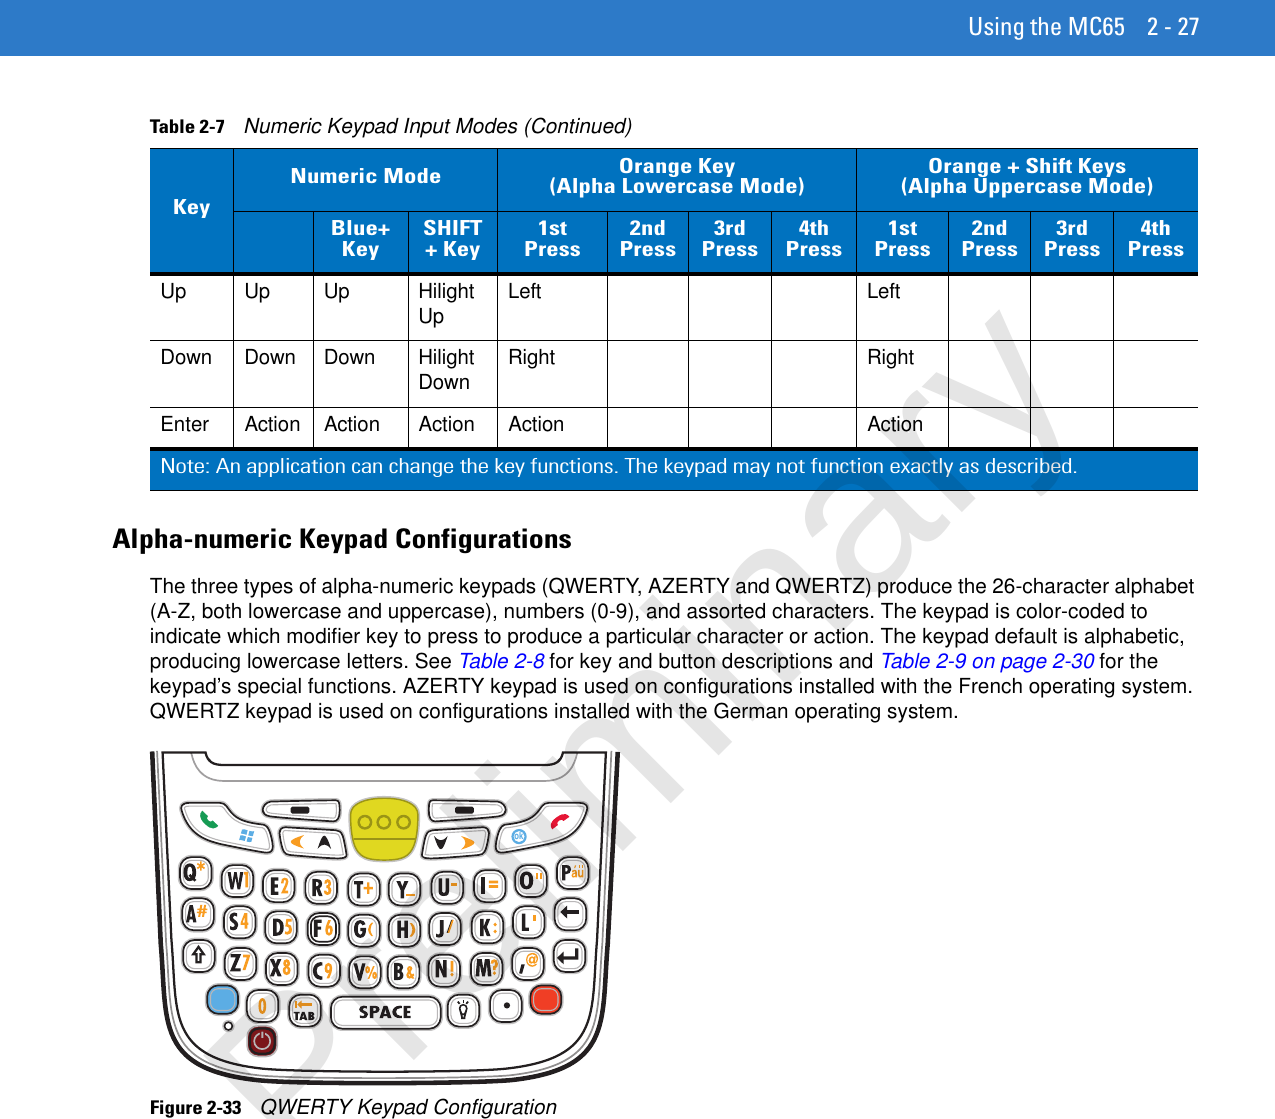 Using the MC65 2 - 27Alpha-numeric Keypad ConfigurationsThe three types of alpha-numeric keypads (QWERTY, AZERTY and QWERTZ) produce the 26-character alphabet (A-Z, both lowercase and uppercase), numbers (0-9), and assorted characters. The keypad is color-coded to indicate which modifier key to press to produce a particular character or action. The keypad default is alphabetic, producing lowercase letters. See Table 2-8 for key and button descriptions and Table 2-9 on page 2-30 for the keypad’s special functions. AZERTY keypad is used on configurations installed with the French operating system. QWERTZ keypad is used on configurations installed with the German operating system.Figure 2-33    QWERTY Keypad ConfigurationUp Up Up Hilight Up Left LeftDown Down Down Hilight Down Right RightEnter Action Action Action Action ActionTable 2-7    Numeric Keypad Input Modes (Continued)KeyNumeric Mode Orange Key(Alpha Lowercase Mode)Orange + Shift Keys(Alpha Uppercase Mode)Blue+KeySHIFT + Key1st Press2nd Press3rd Press4th Press1st Press2nd Press3rd Press4th PressNote: An application can change the key functions. The keypad may not function exactly as described.okPreliminary